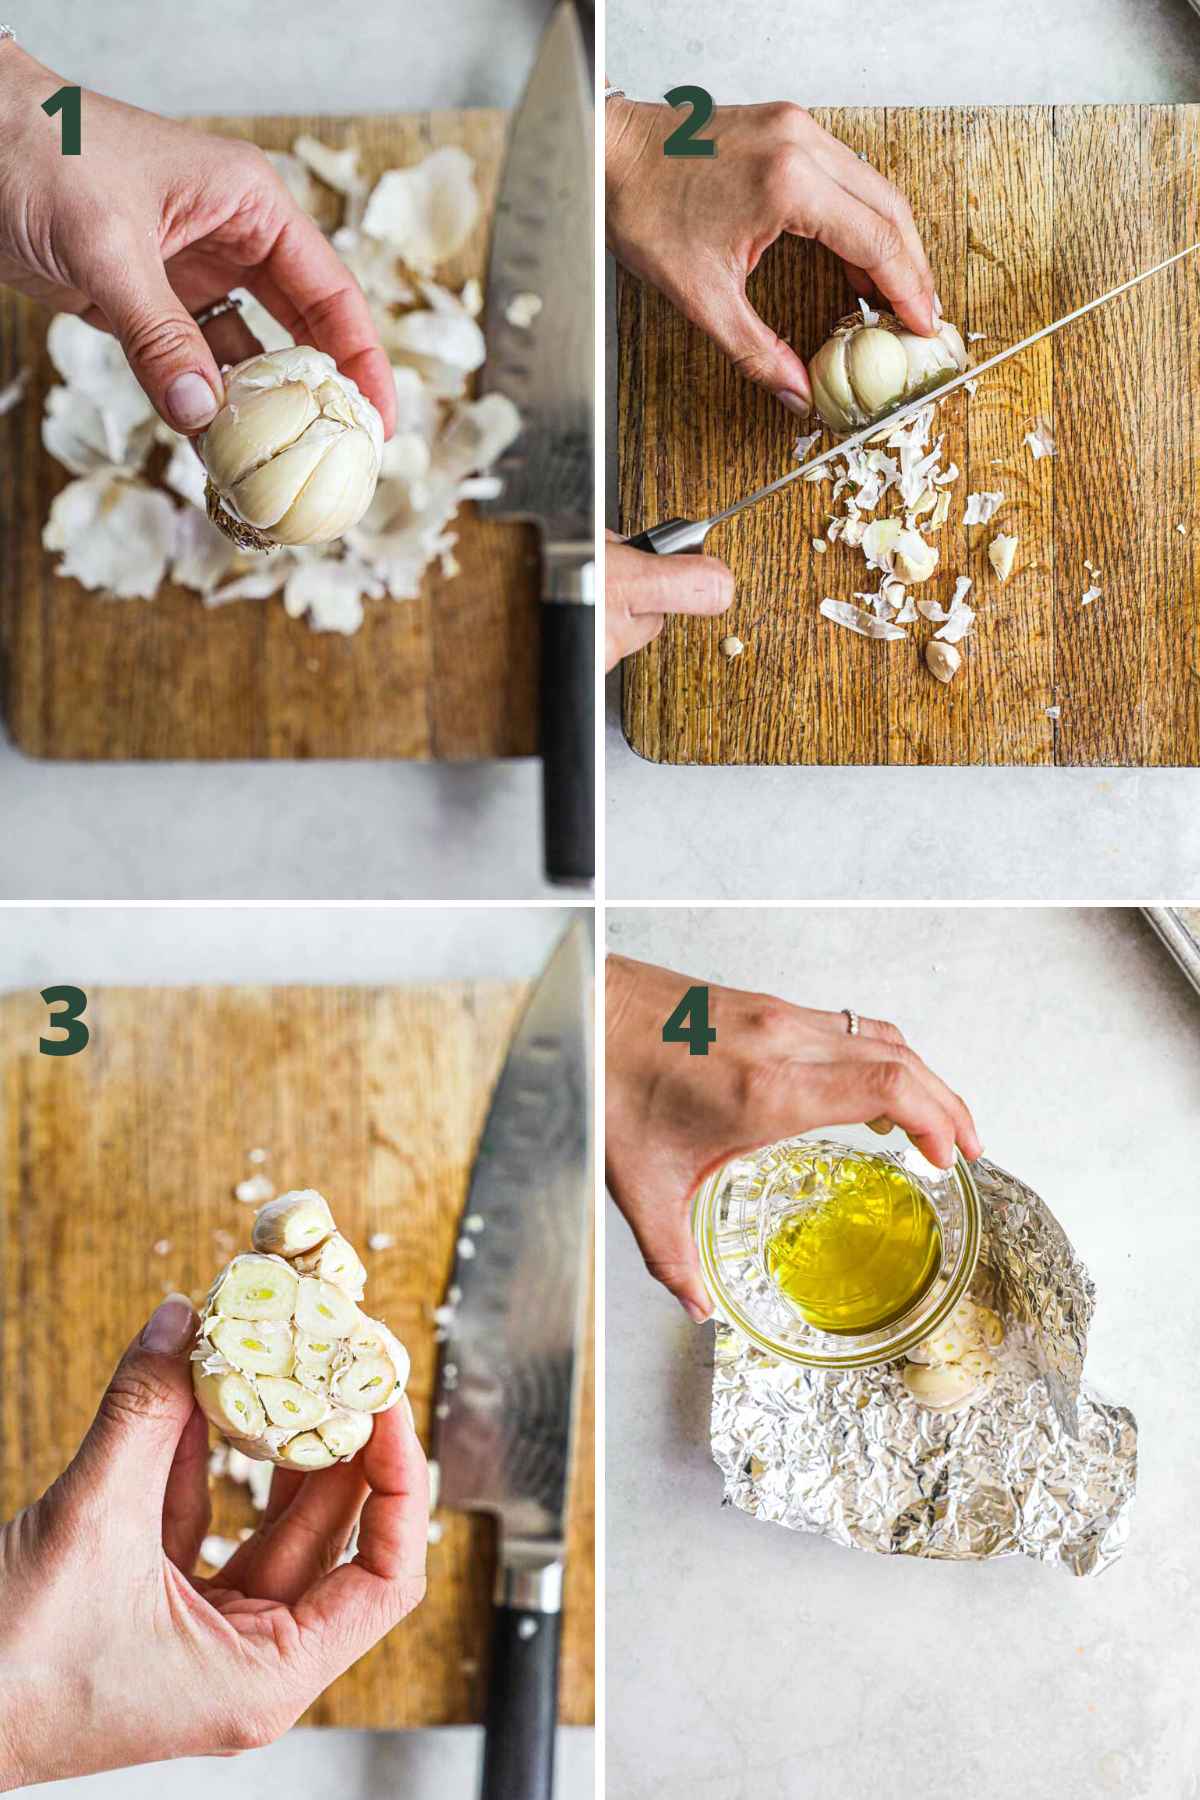 Steps to make miso garlic butter paste, cut garlic, place in foil, and drizzle with olive oil, then roast.